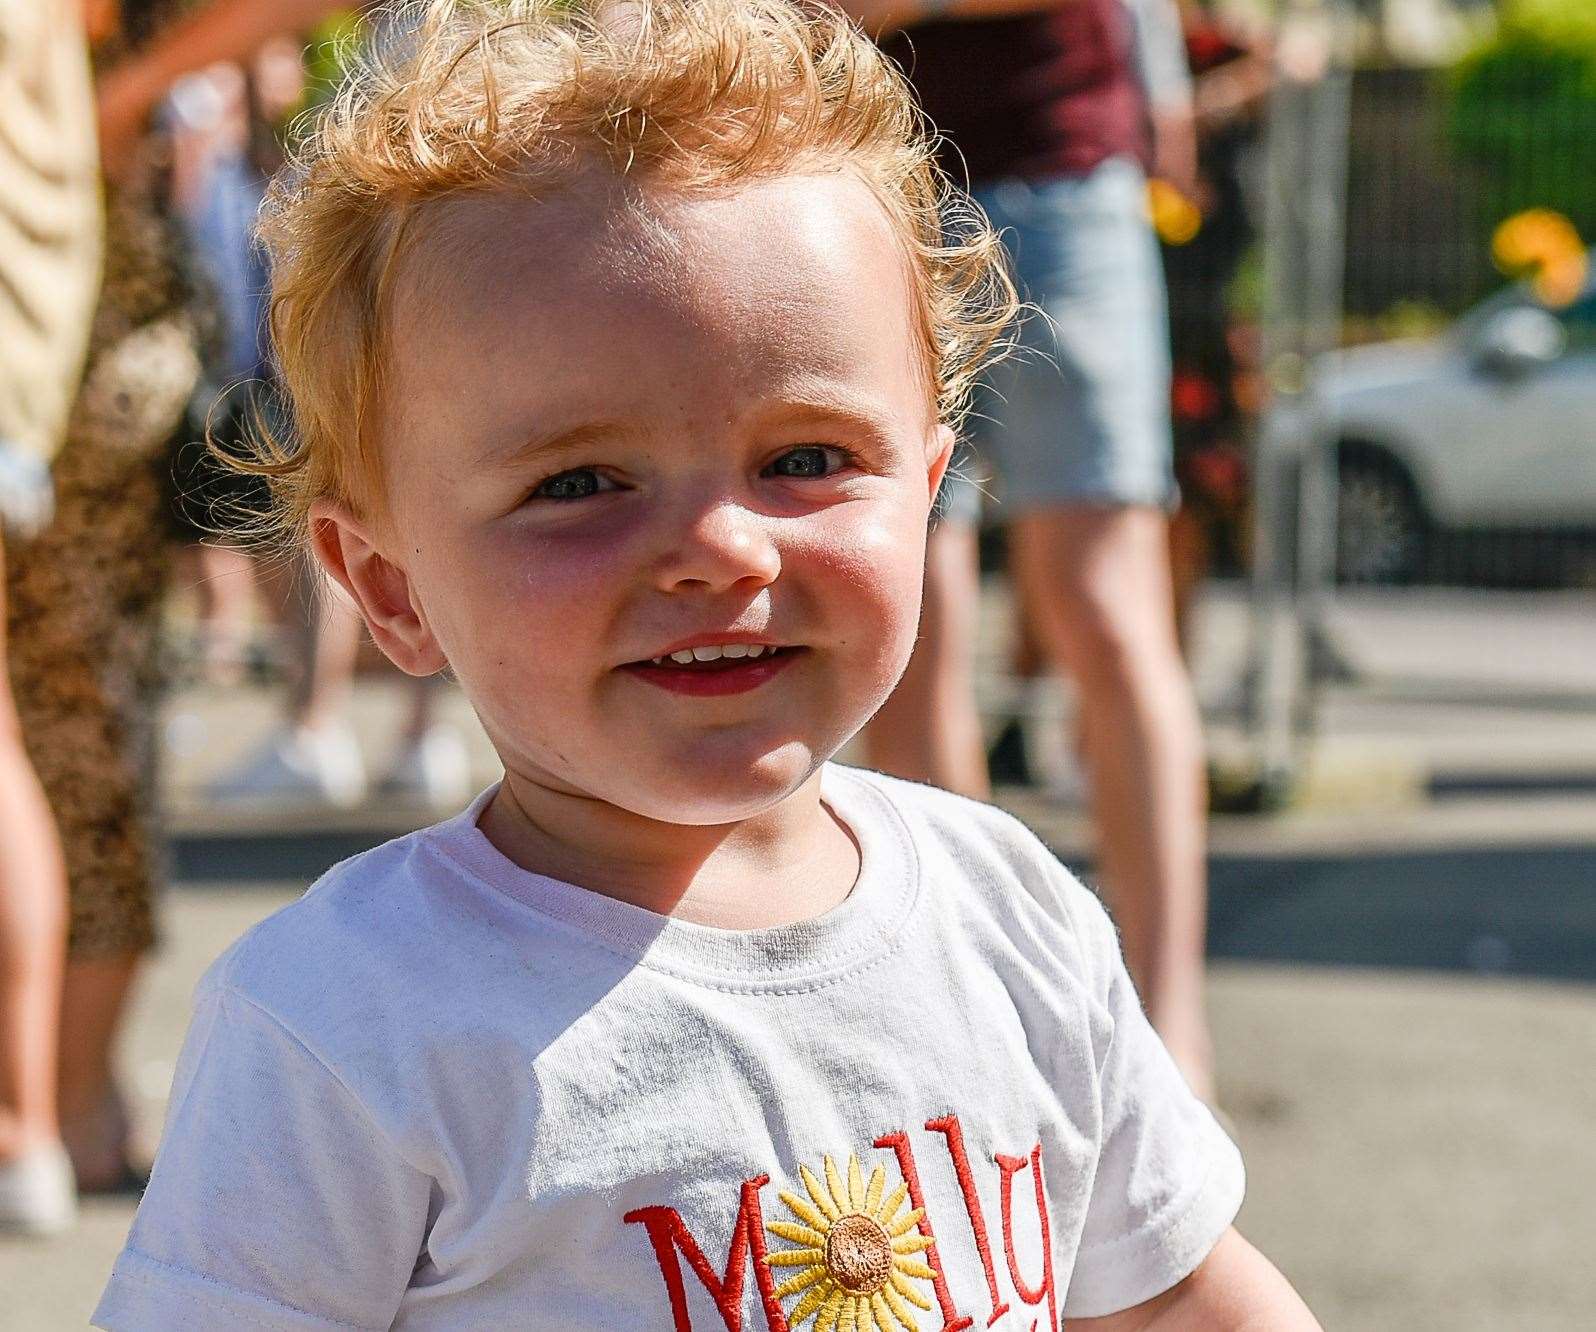 A young festival goer in 2019 Picture: Tony Jones